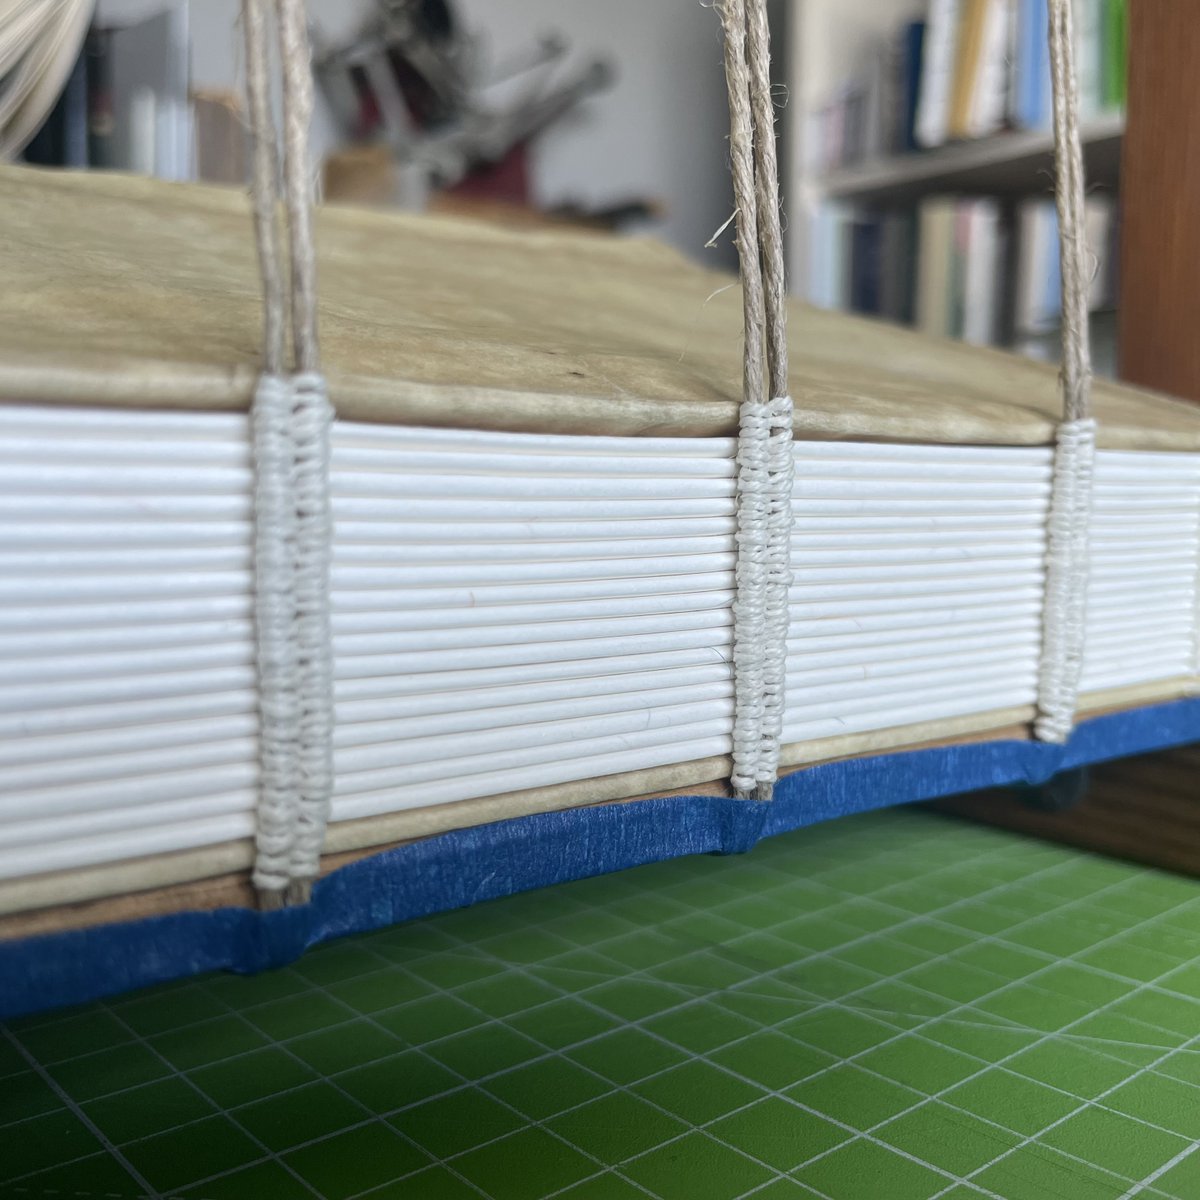 More spine love today. This time, packed medieval sewing.
.
.
.
#isleofiona #madeoniona #scottishcraft #iona #madeinthehebrides #bookbinding #heritagebook #traditionalbook #wipbook #traditionalbookbinding #bookbindingprocess #historicbooks #medievalbook